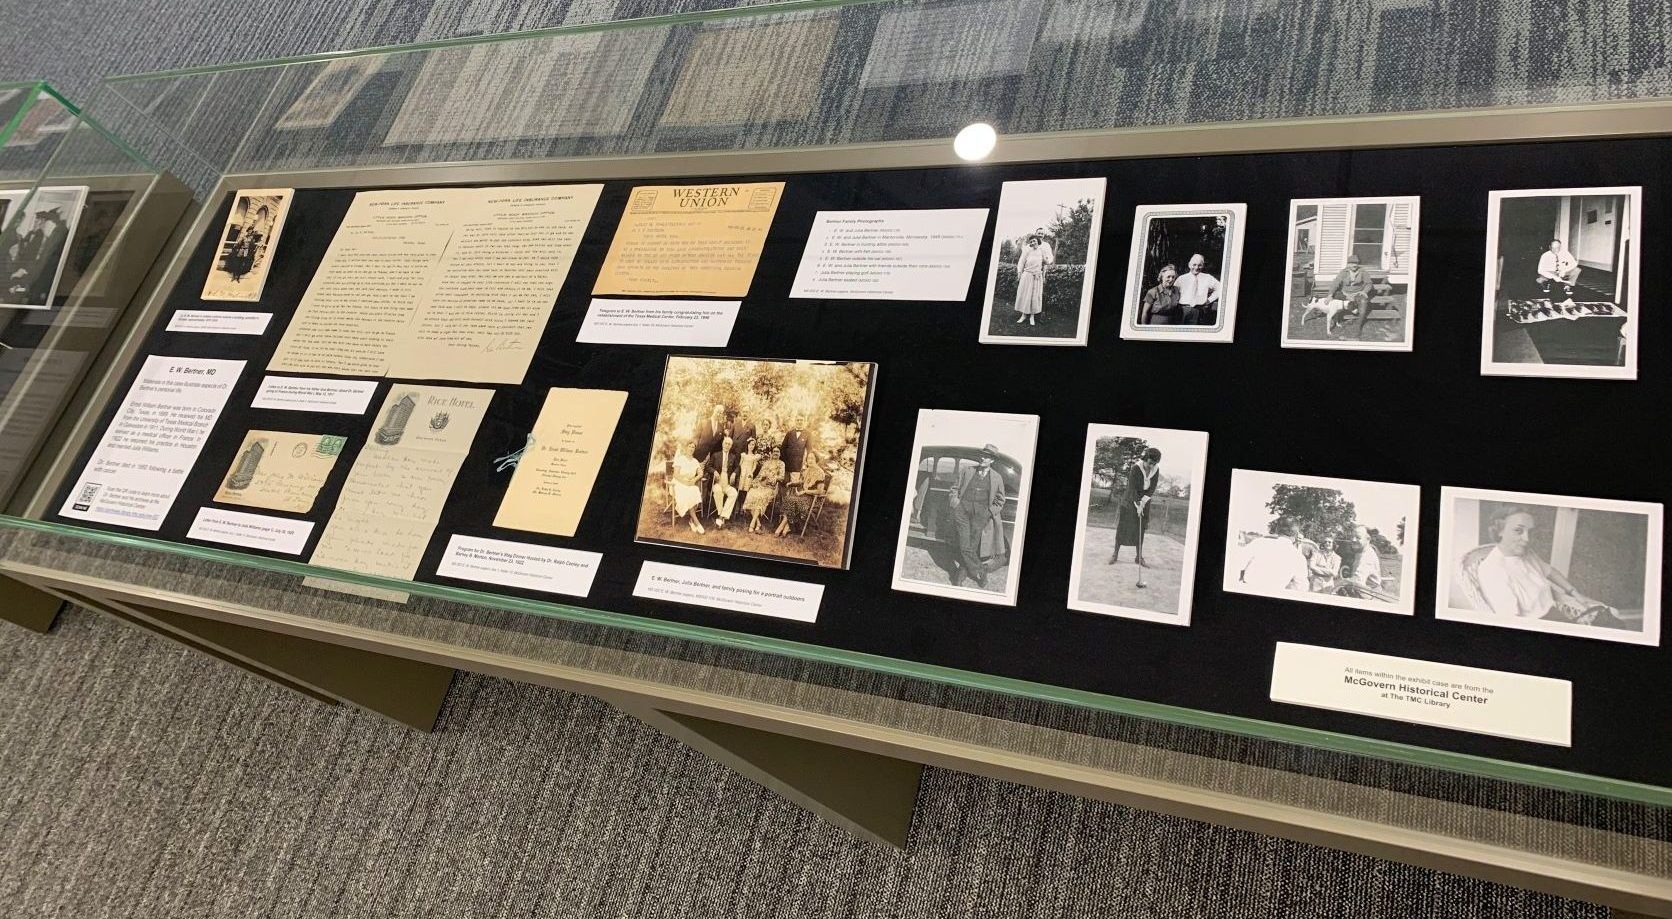 The second case in the exhibit features documents and photographs illustrating Dr. Bertner's personal life. 